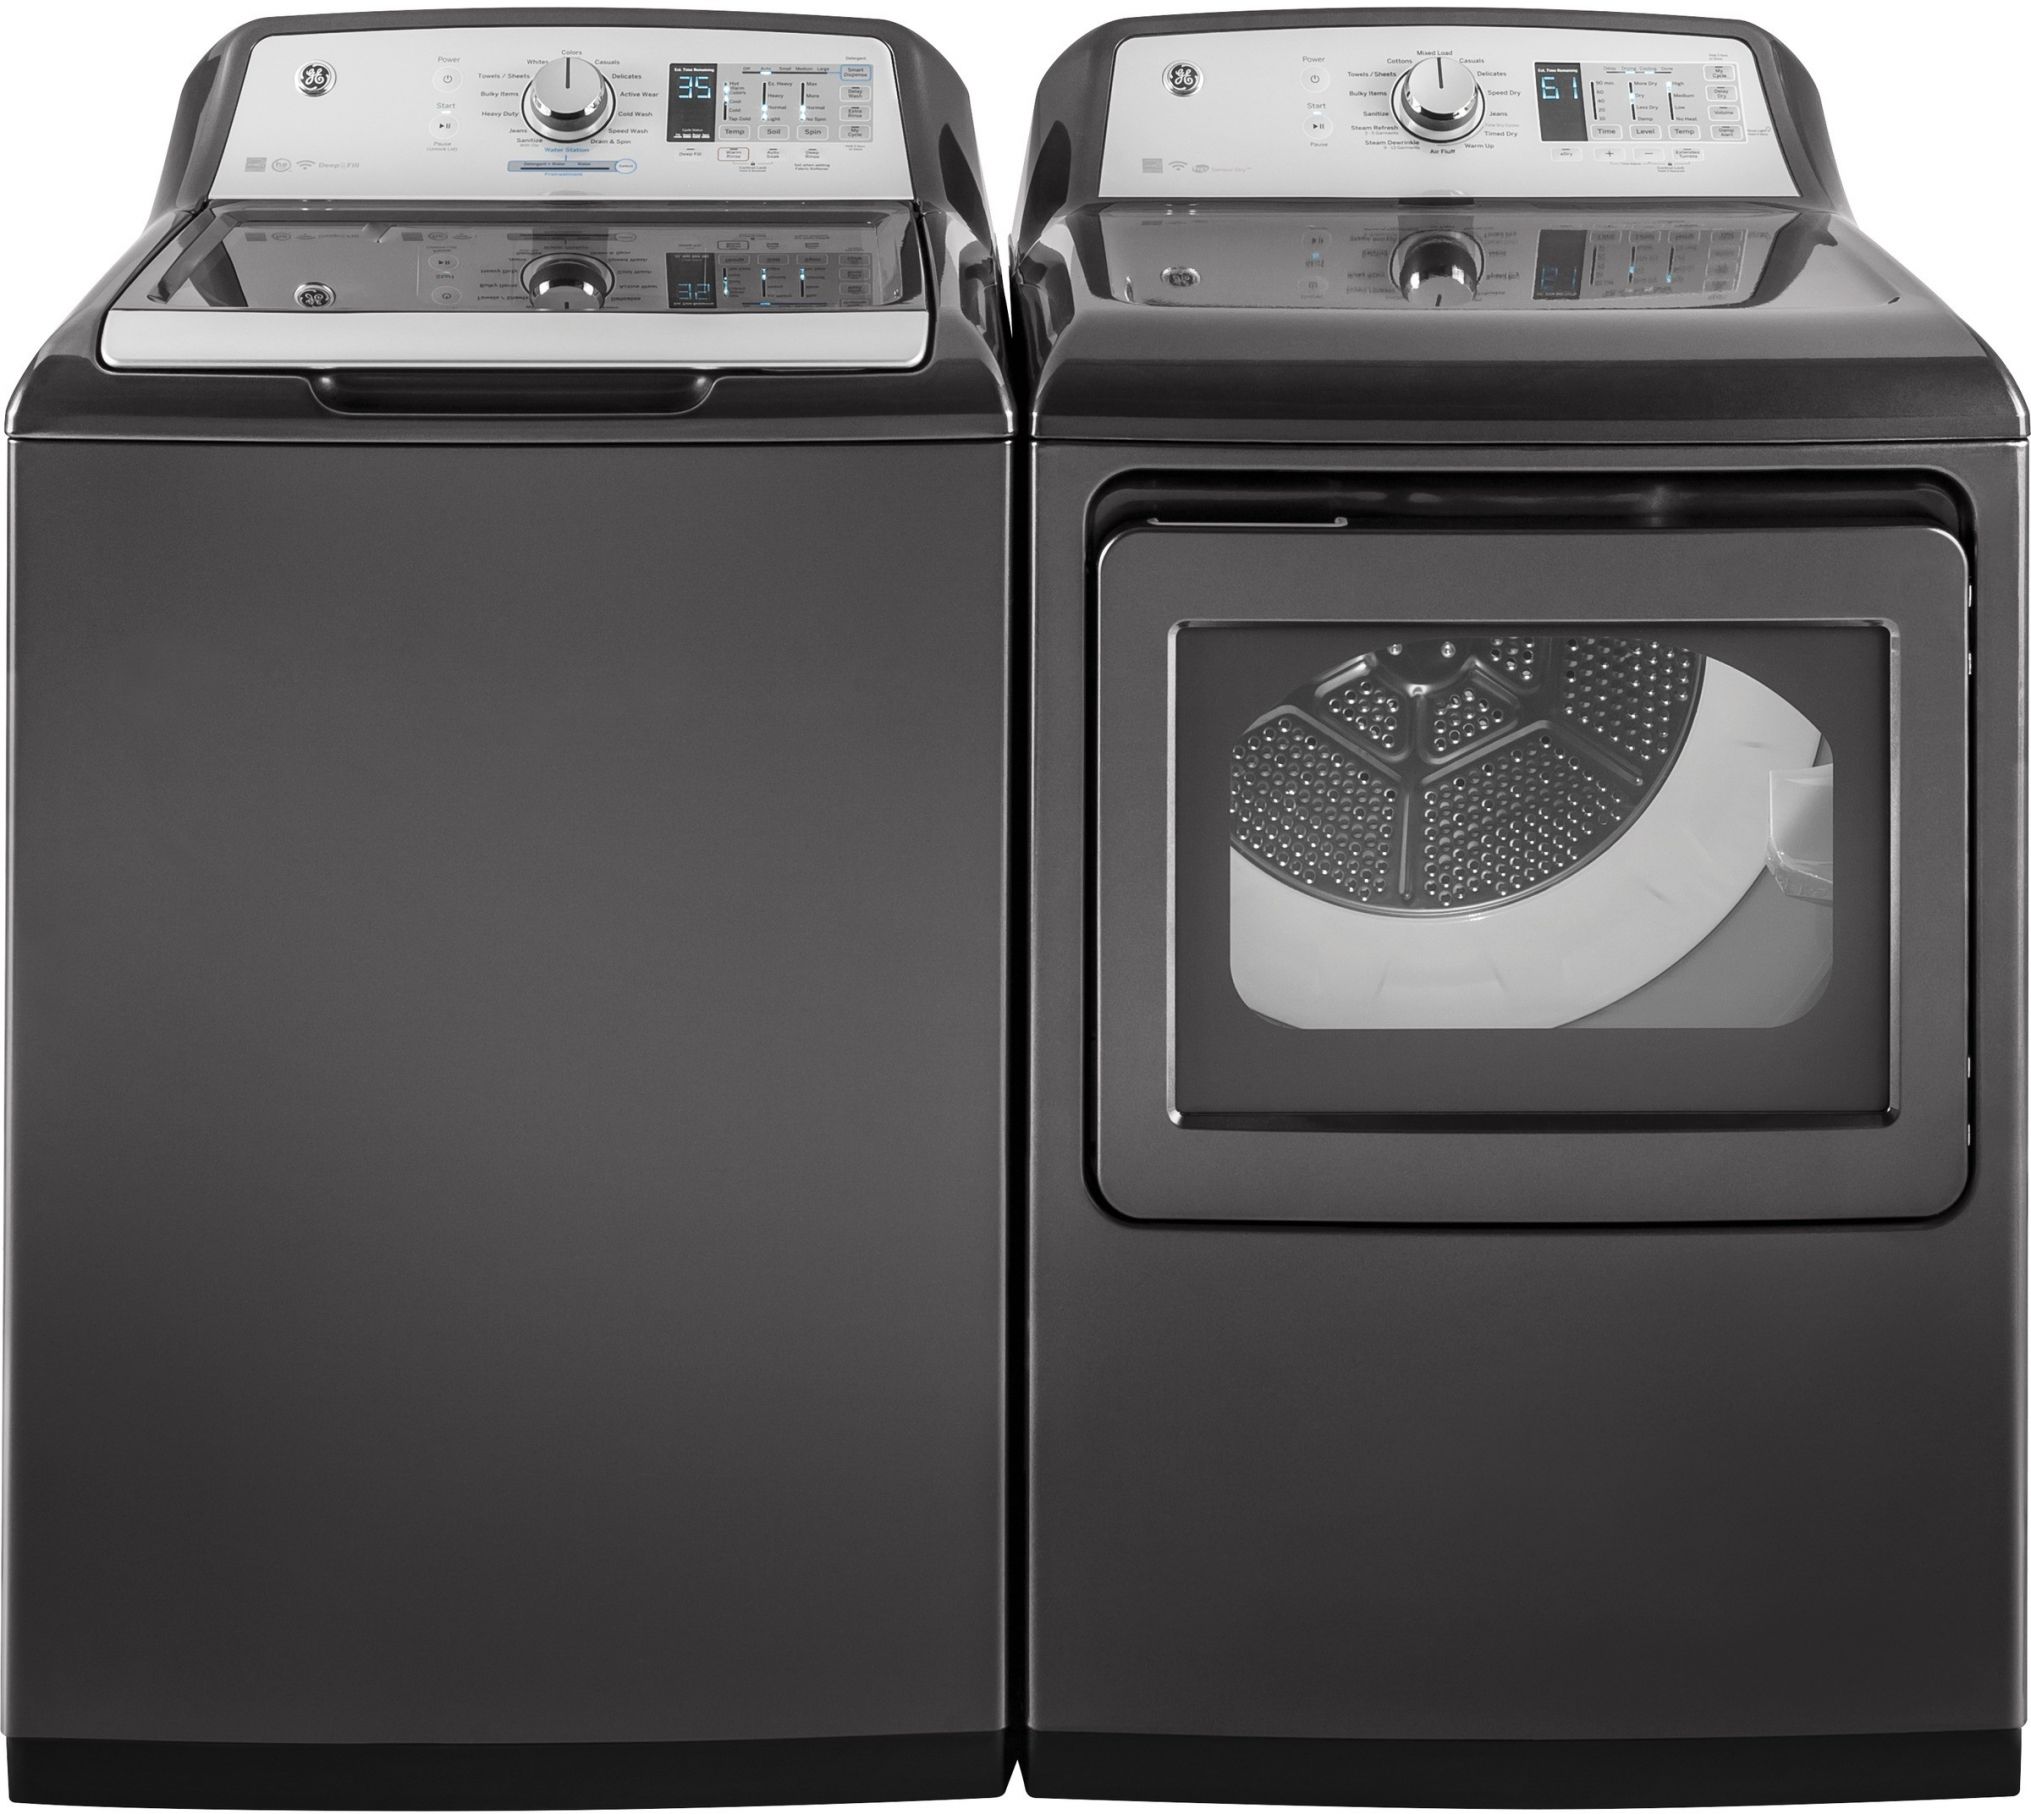 Heavy Duty Washer and Dryer Blank Meme Template